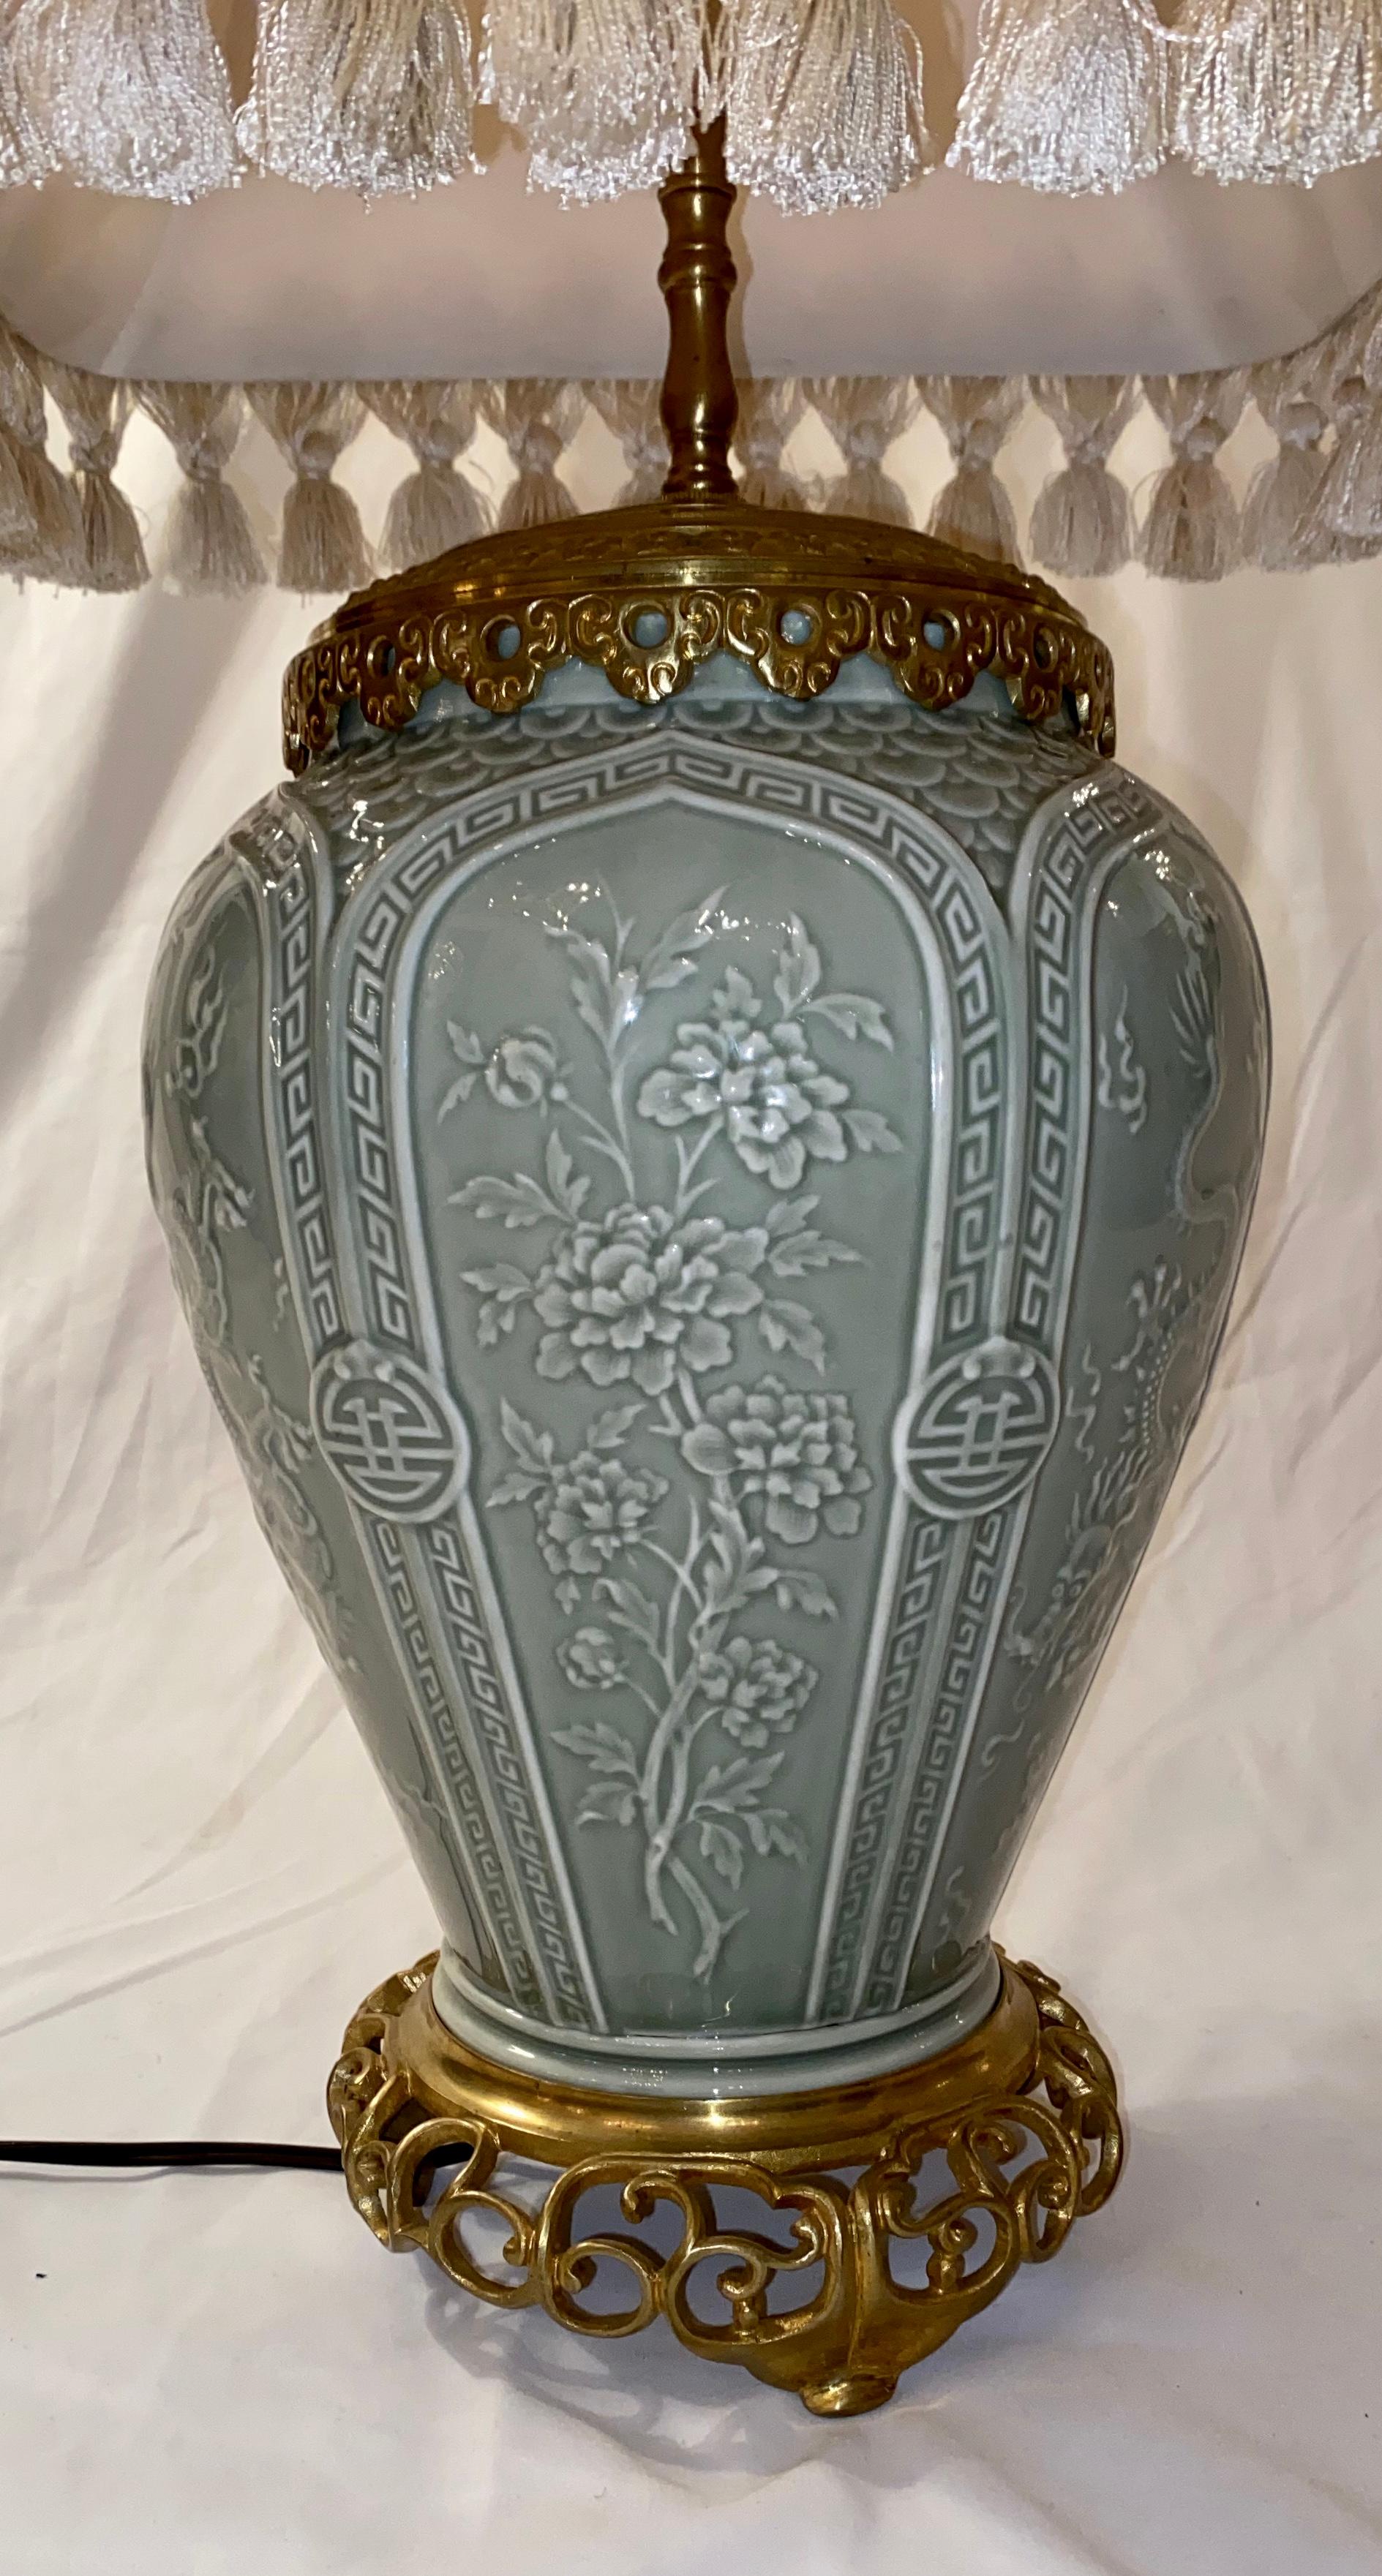 This beautiful lamp was first a vase and then mounted on bronze to serve as a lamp. The origin is Chinese, but the lamp came from England.
 